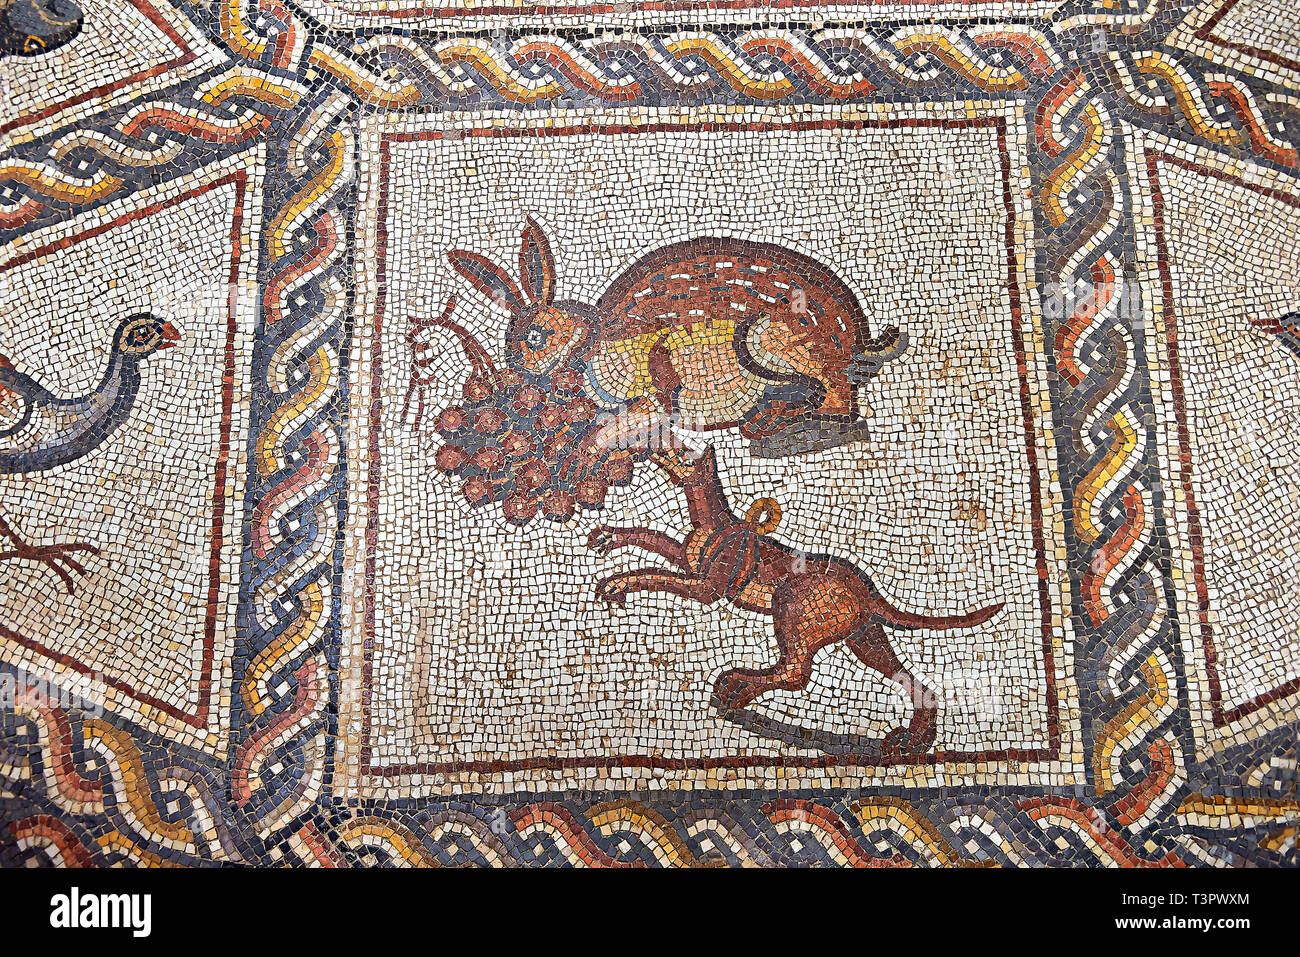 Hunting scene with a hare and dog from the 3rd century Roman mosaic villa floor from Lod, near Tel Aviv, Israel. The Roman floor mosaic of Lod is the  Stock Photo